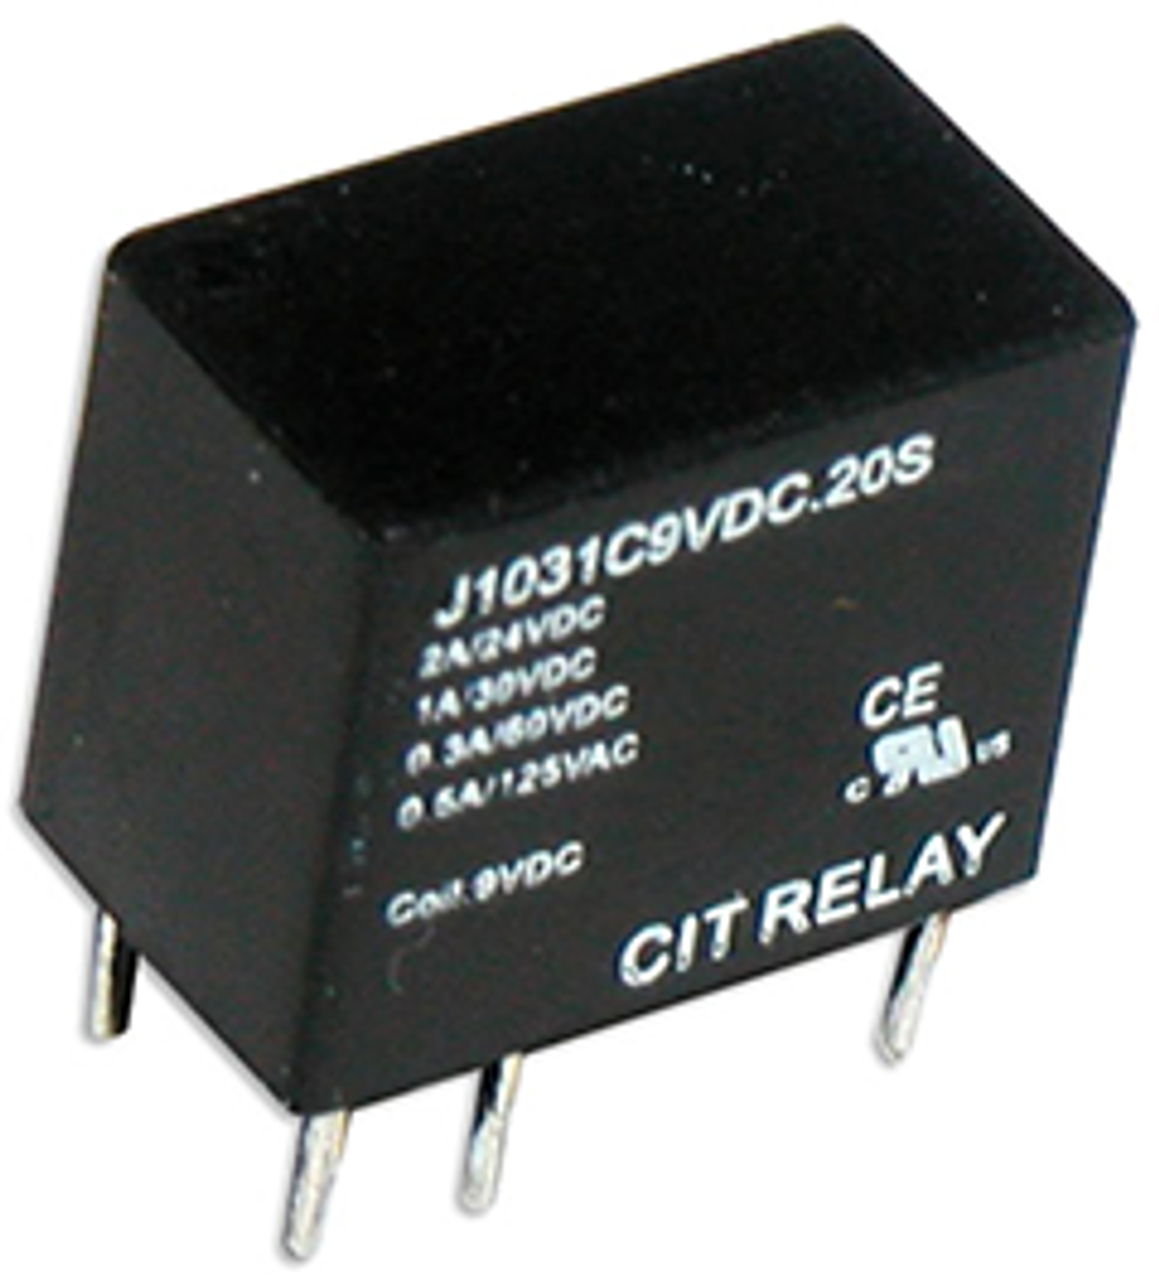 CIT Relay and Switch J1031C24VDC.15S Signal Relays